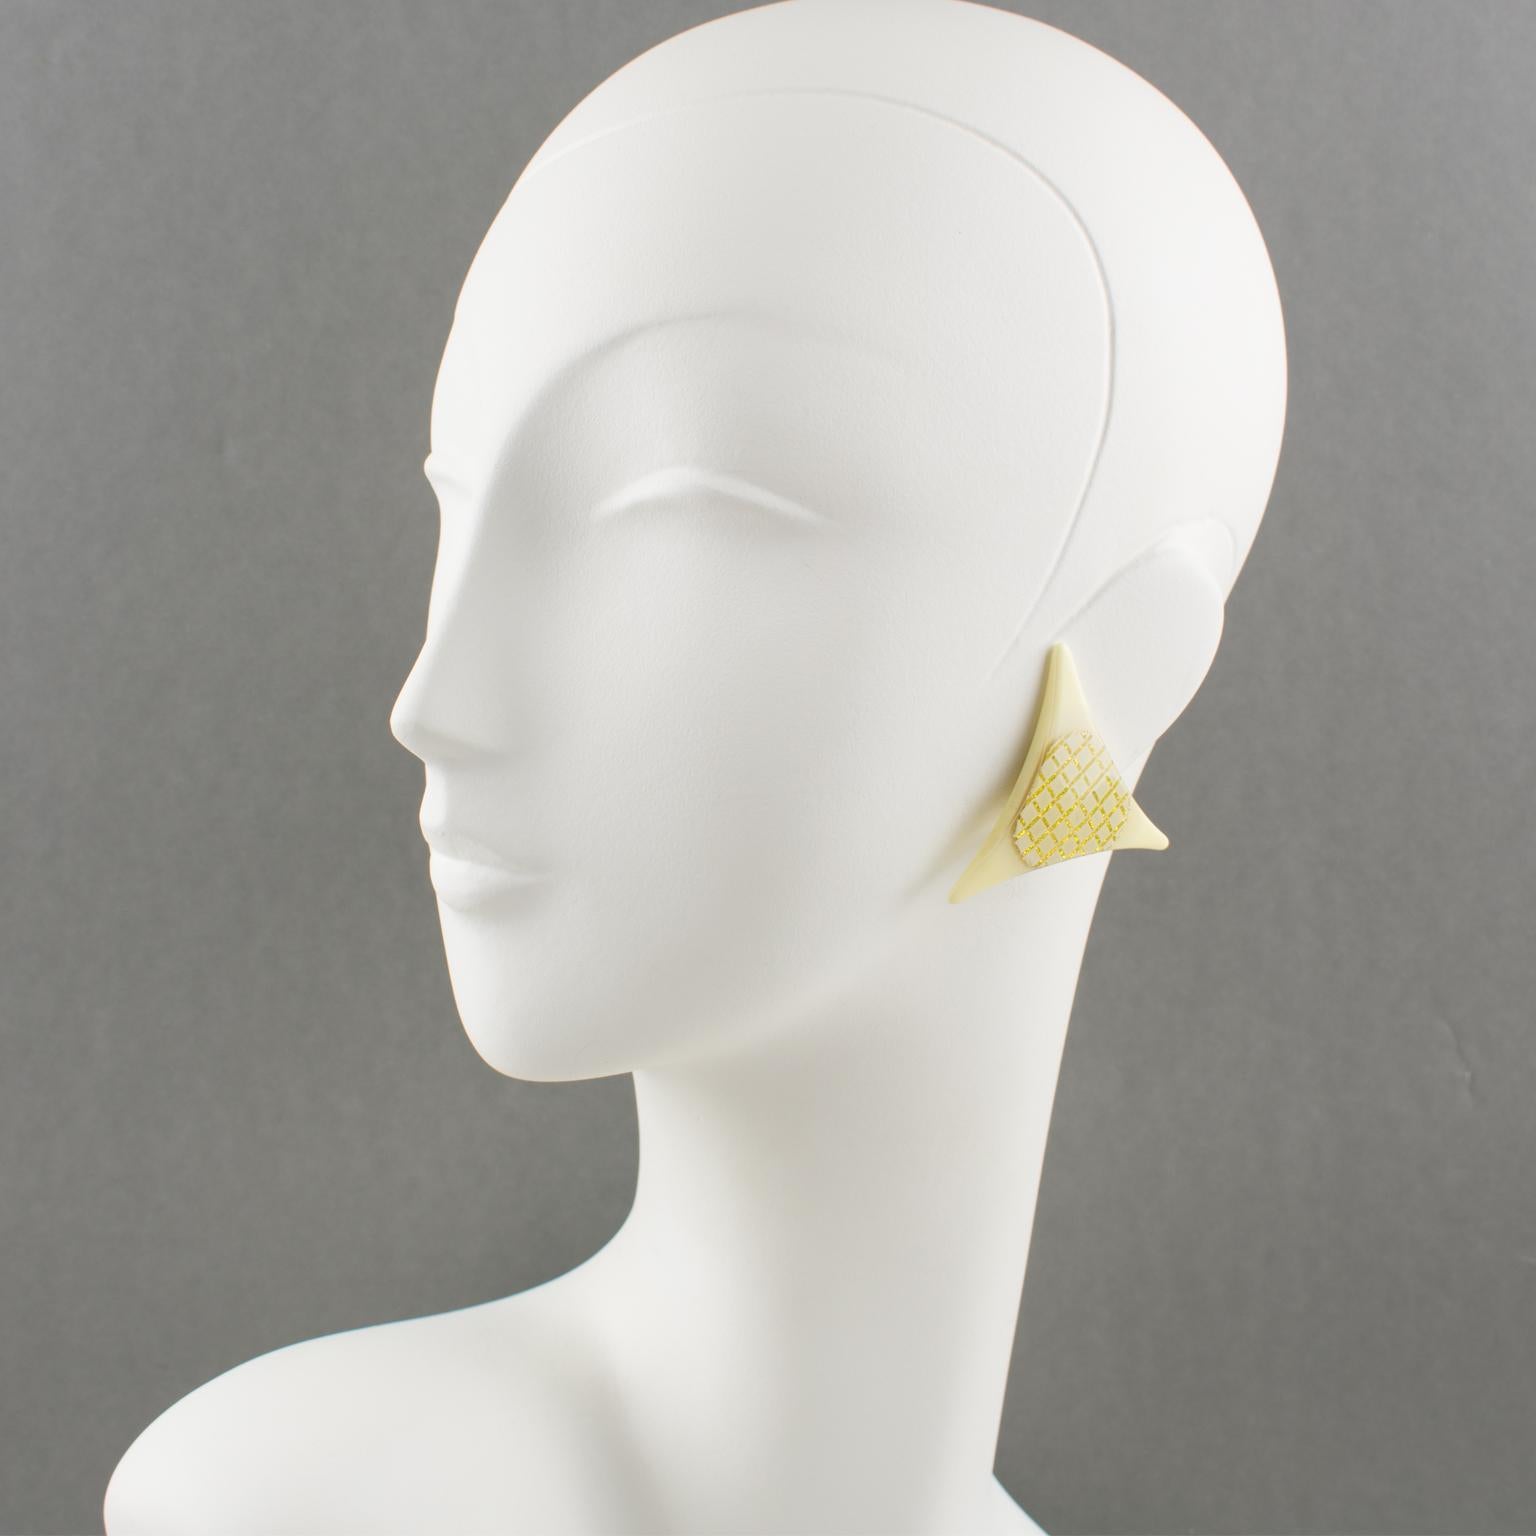 These charming French Artisan Studio Lucite clip-on earrings feature a typical Pop Art design with a large triangle shape and textured pattern. The assorted tone of ivory/cream-white is embellished with gilt plaiting. There is no visible maker's